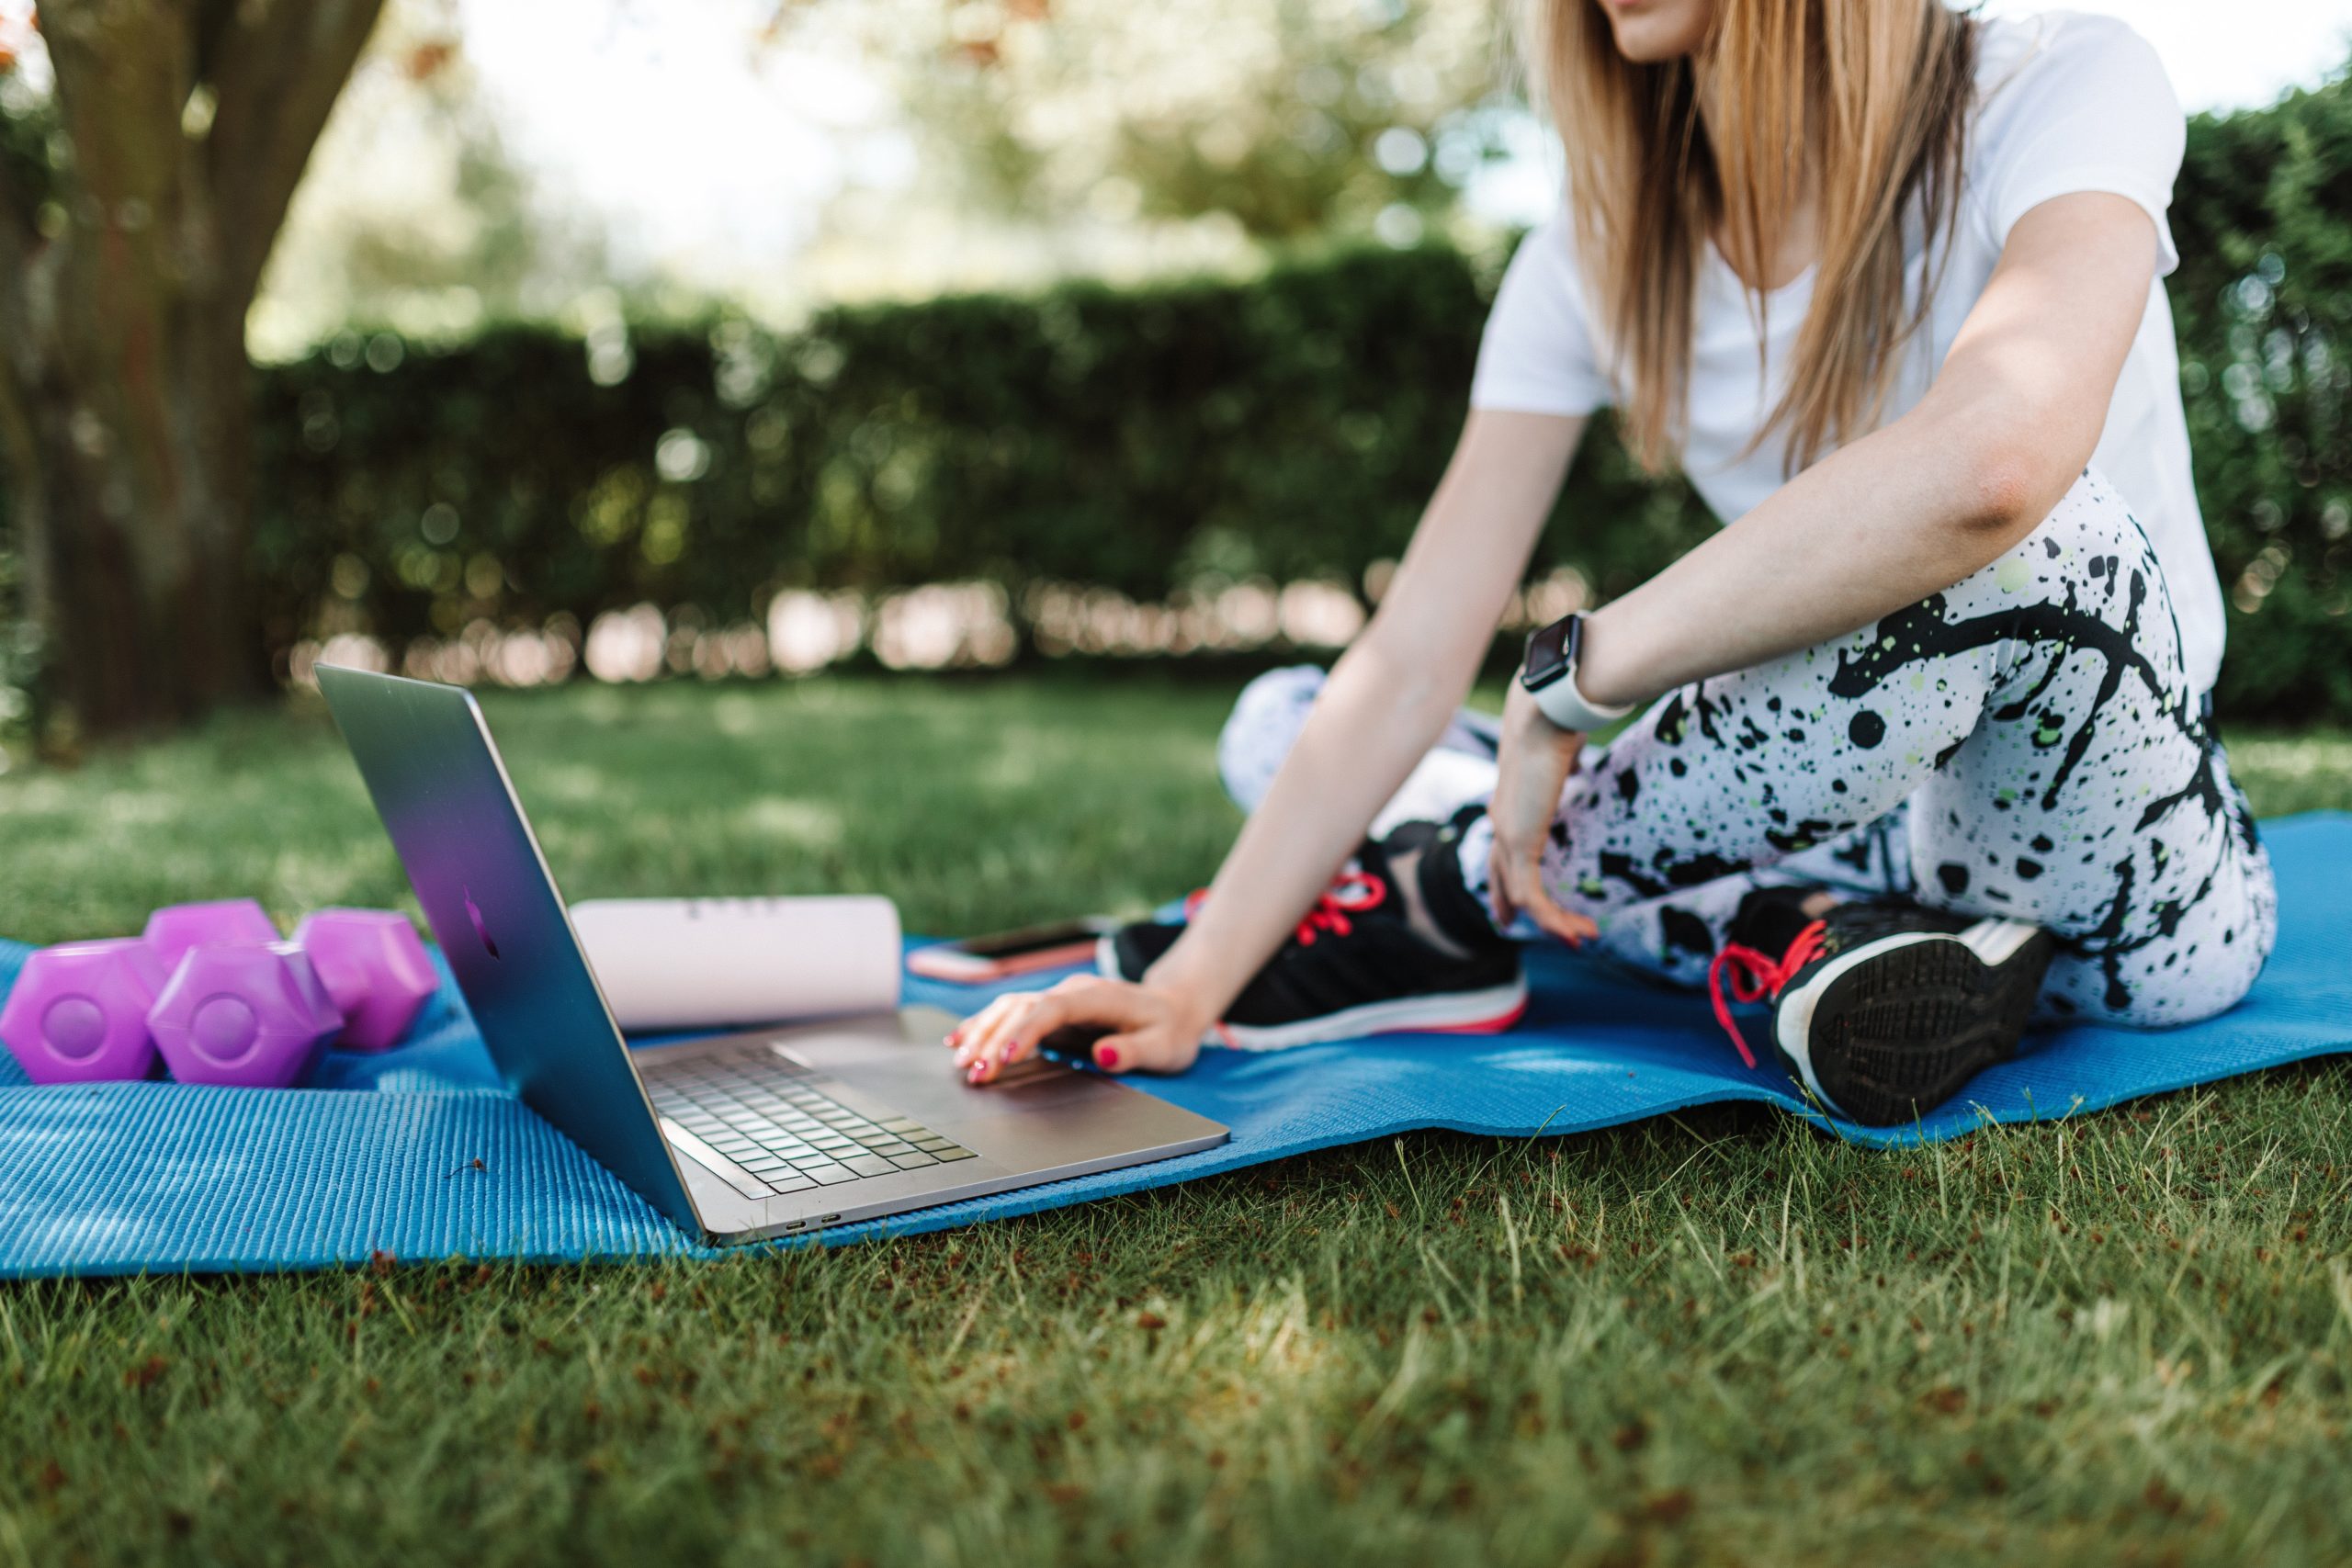 Shallow focus photo of a woman in activewear using a laptop while sitting on a yoga mat